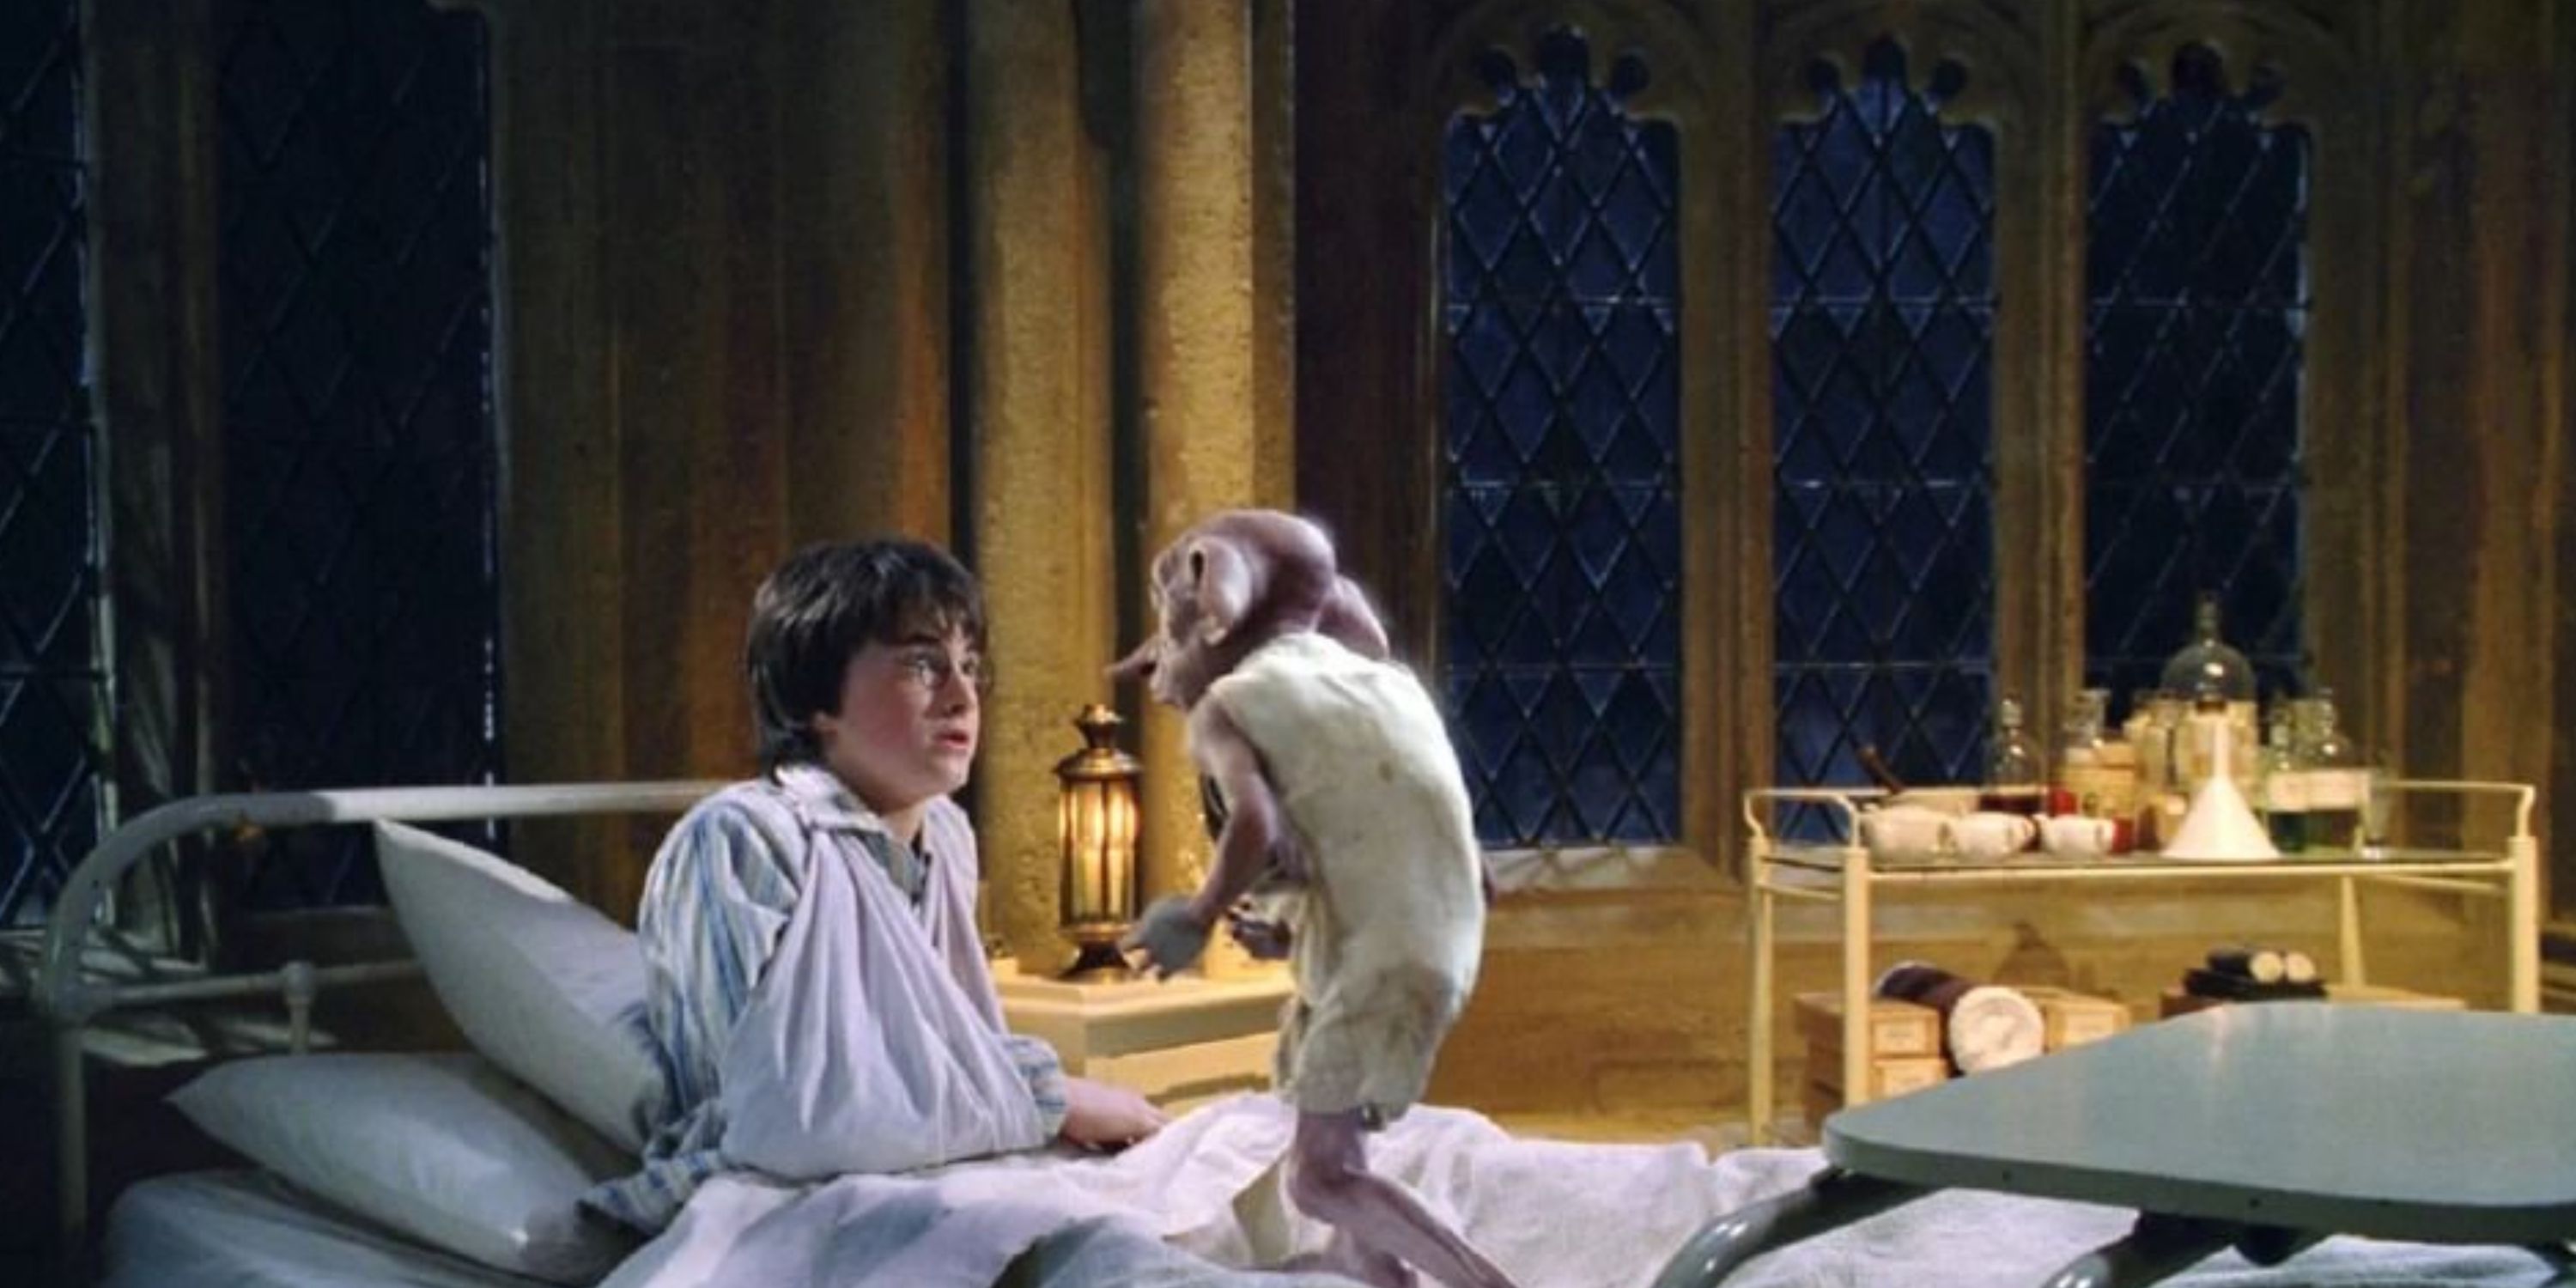 Dobby comes to warn Harry Potter in Chamber of Secrets